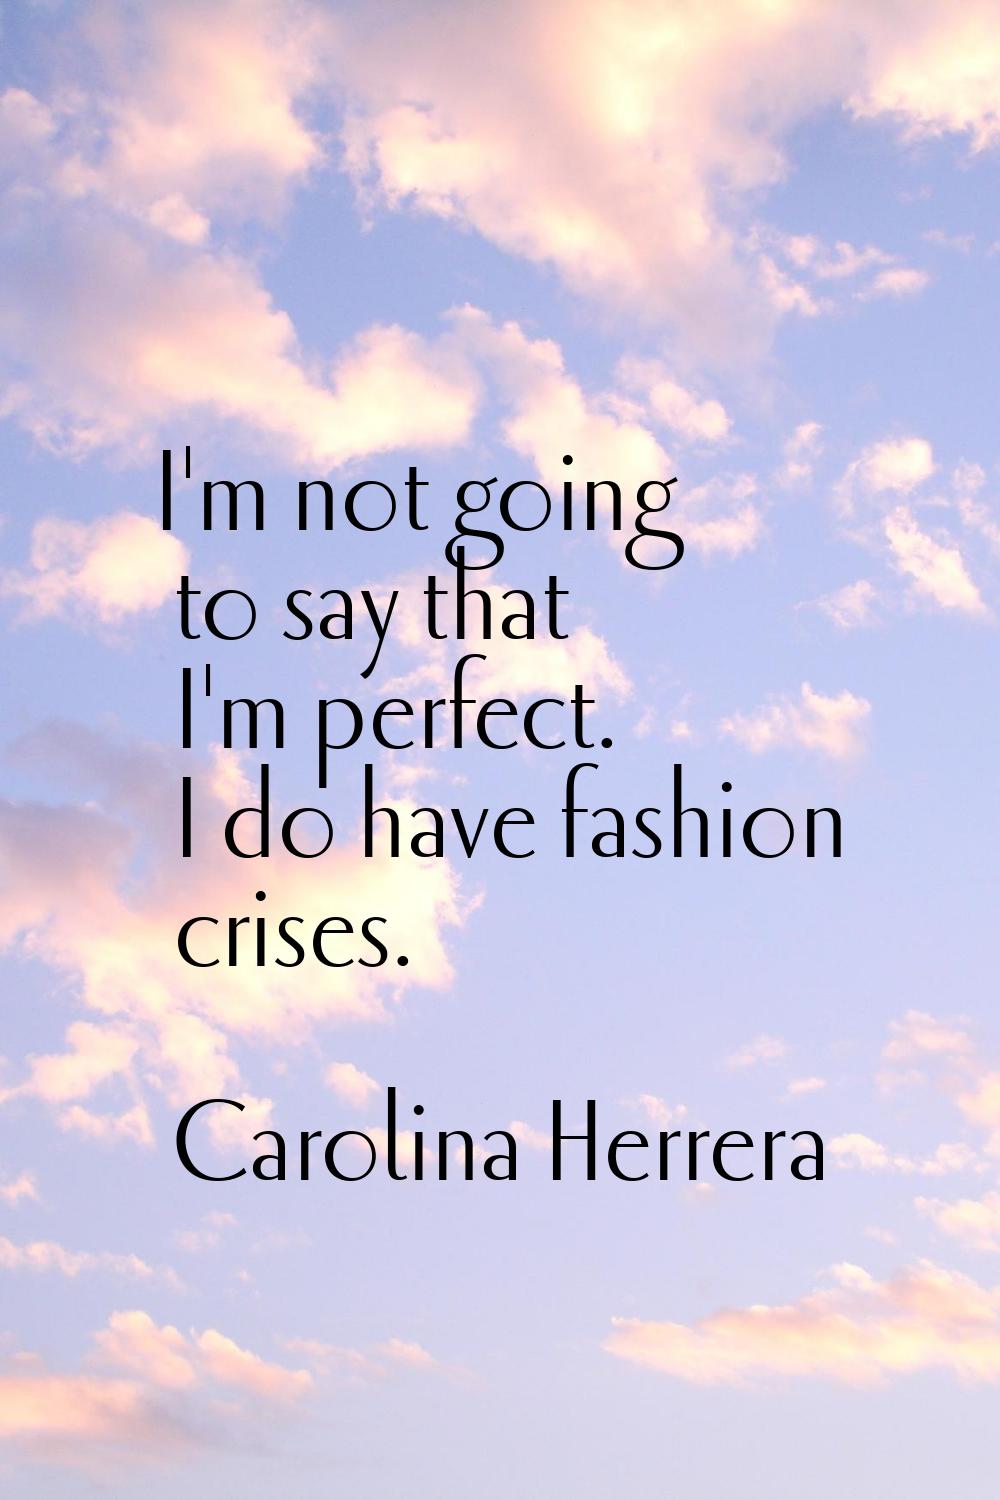 I'm not going to say that I'm perfect. I do have fashion crises.